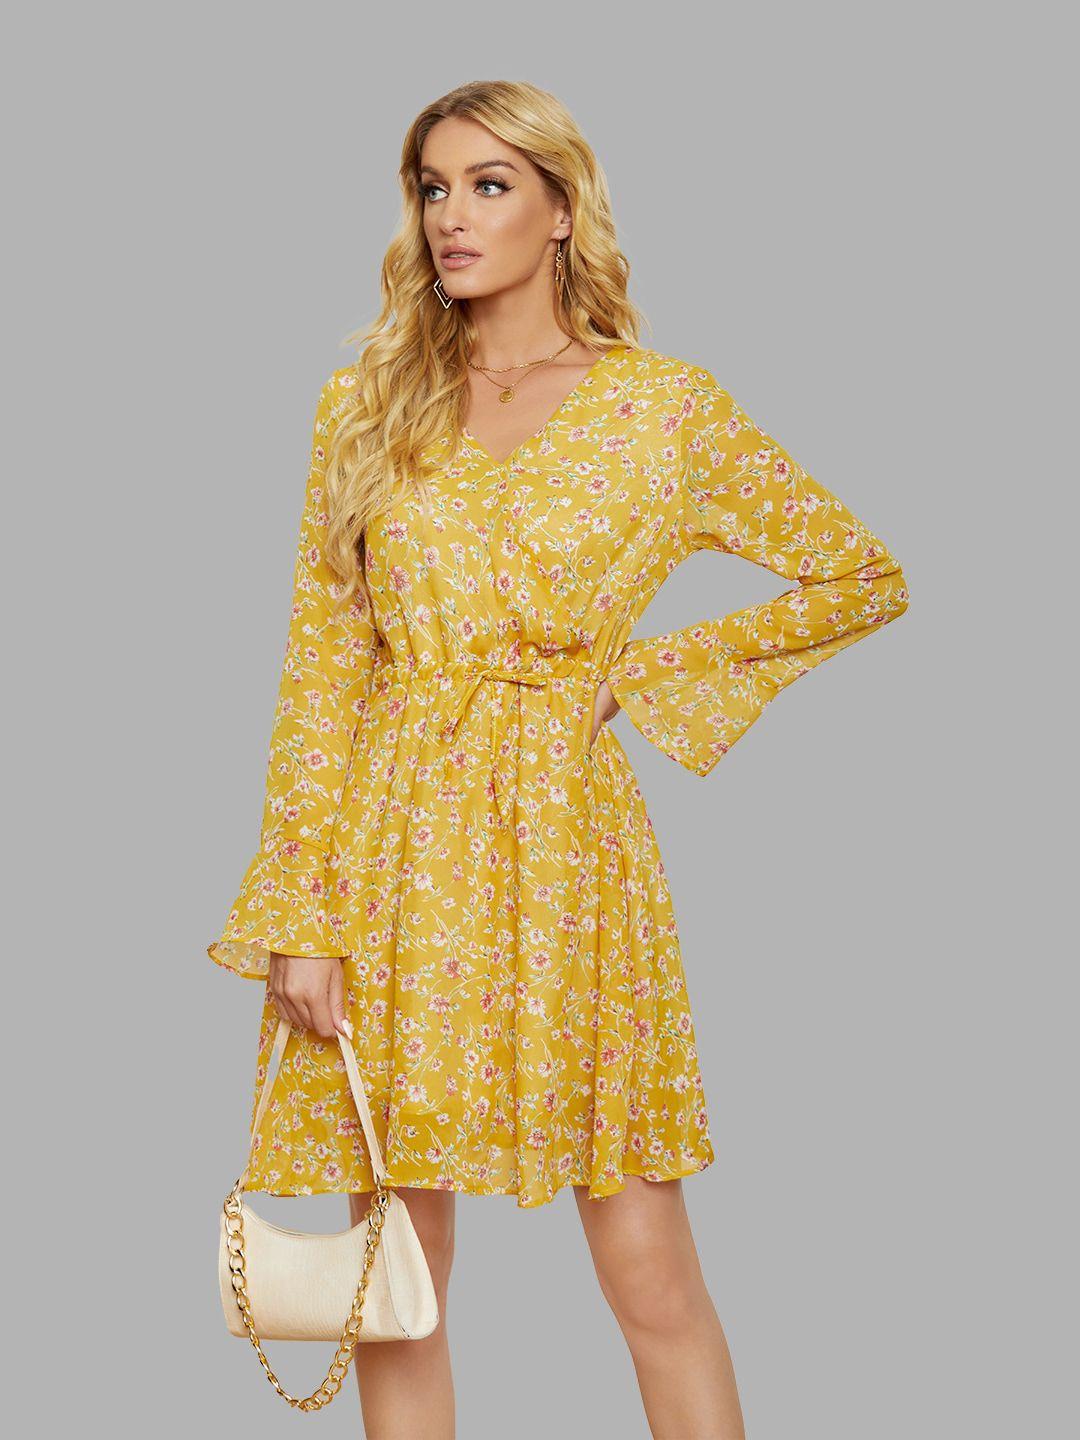 jc collection women yellow & pink floral printed dress